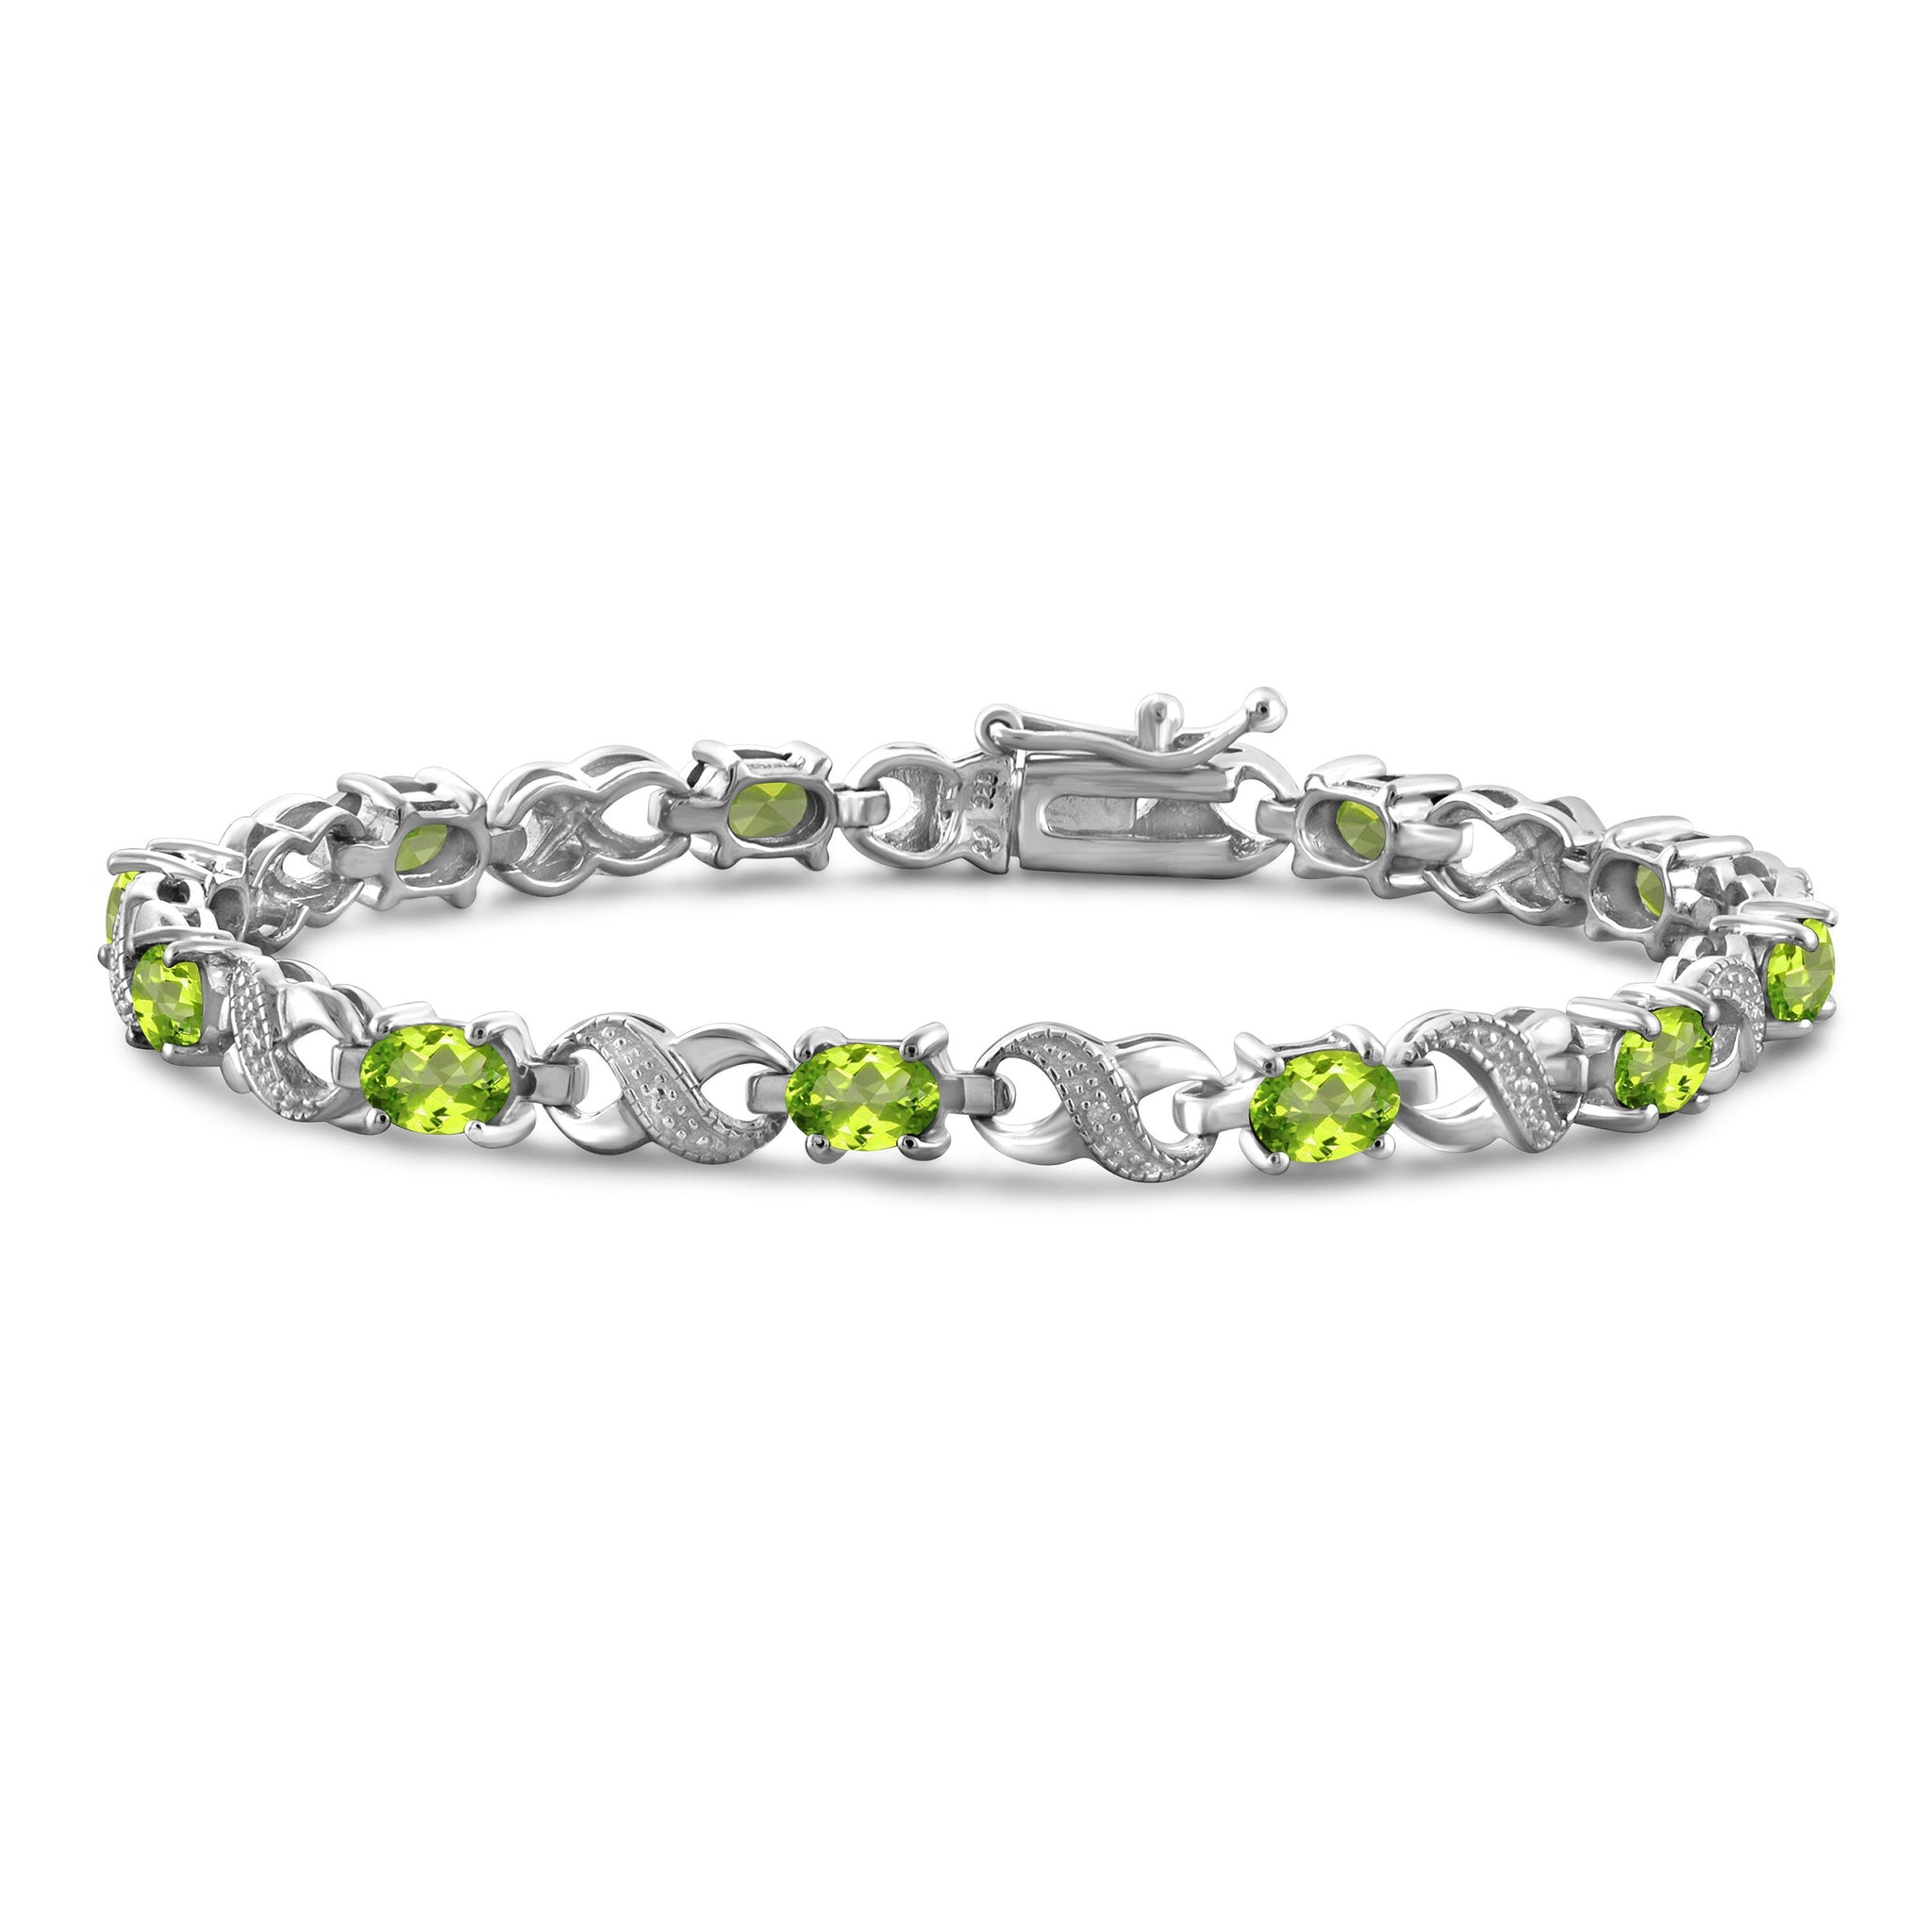 JewelonFire 5 3/4 Carat T.G.W. Peridot And White Diamond Accent Sterling Silver Bracelet - Assorted Colors